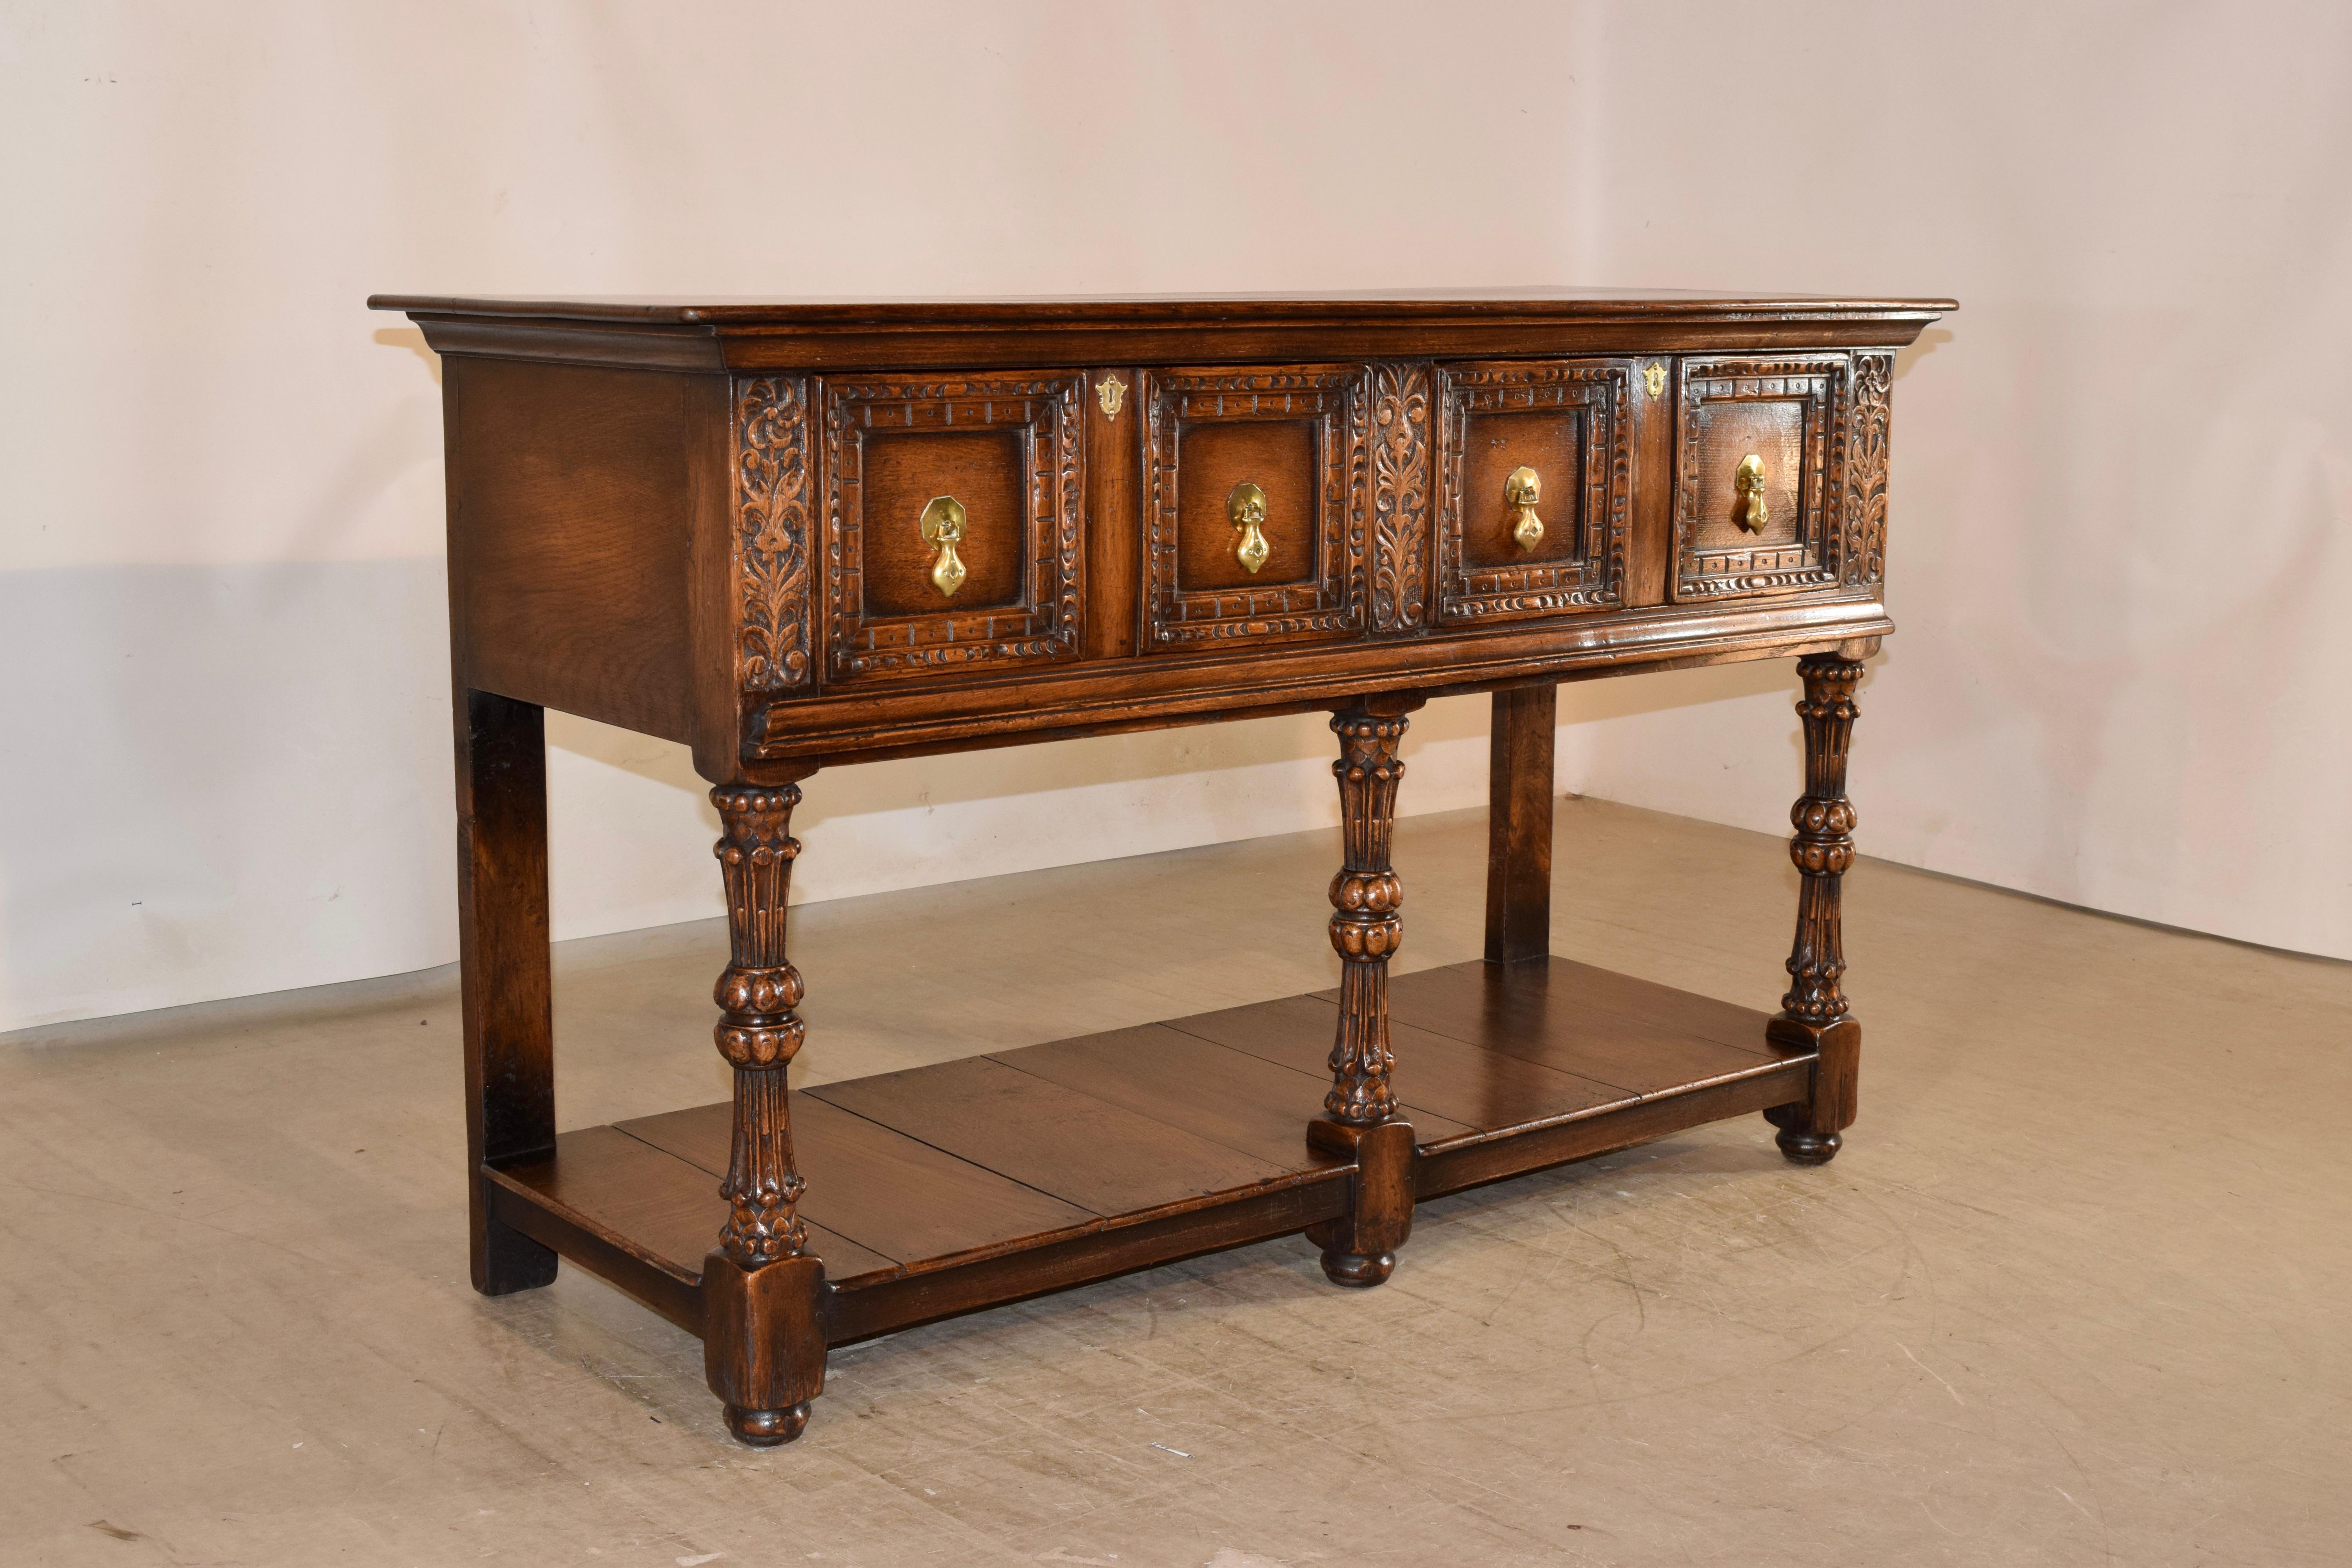 Victorian 19th Century English Paneled Sideboard For Sale